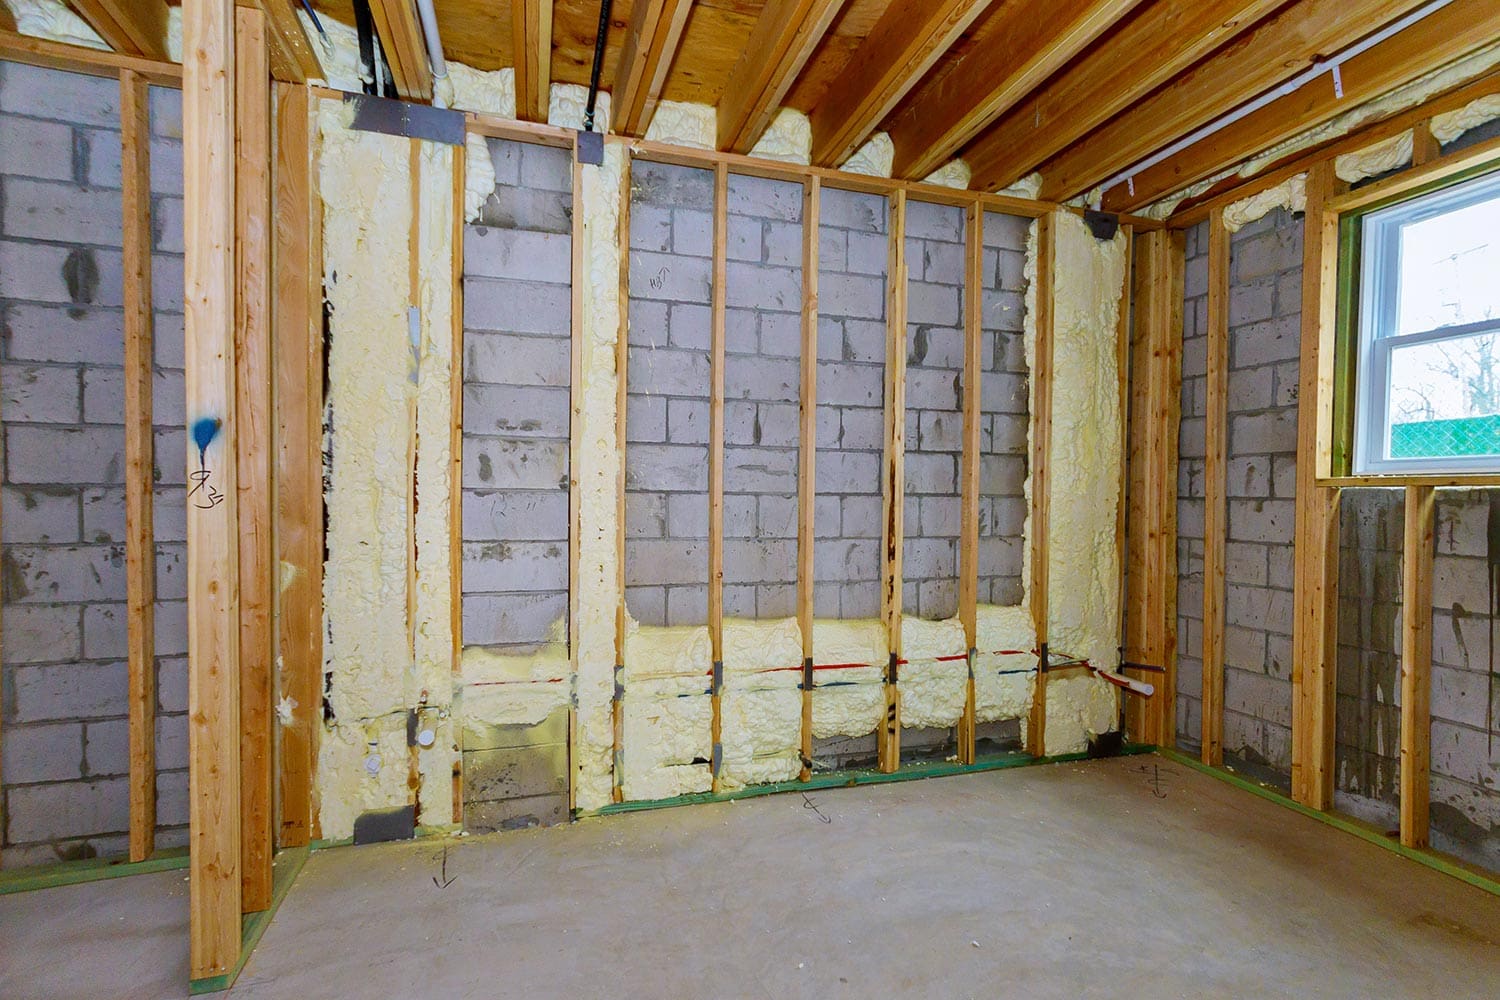 Basement unfinished under construction the wall of a new wooden house in foam for insulation